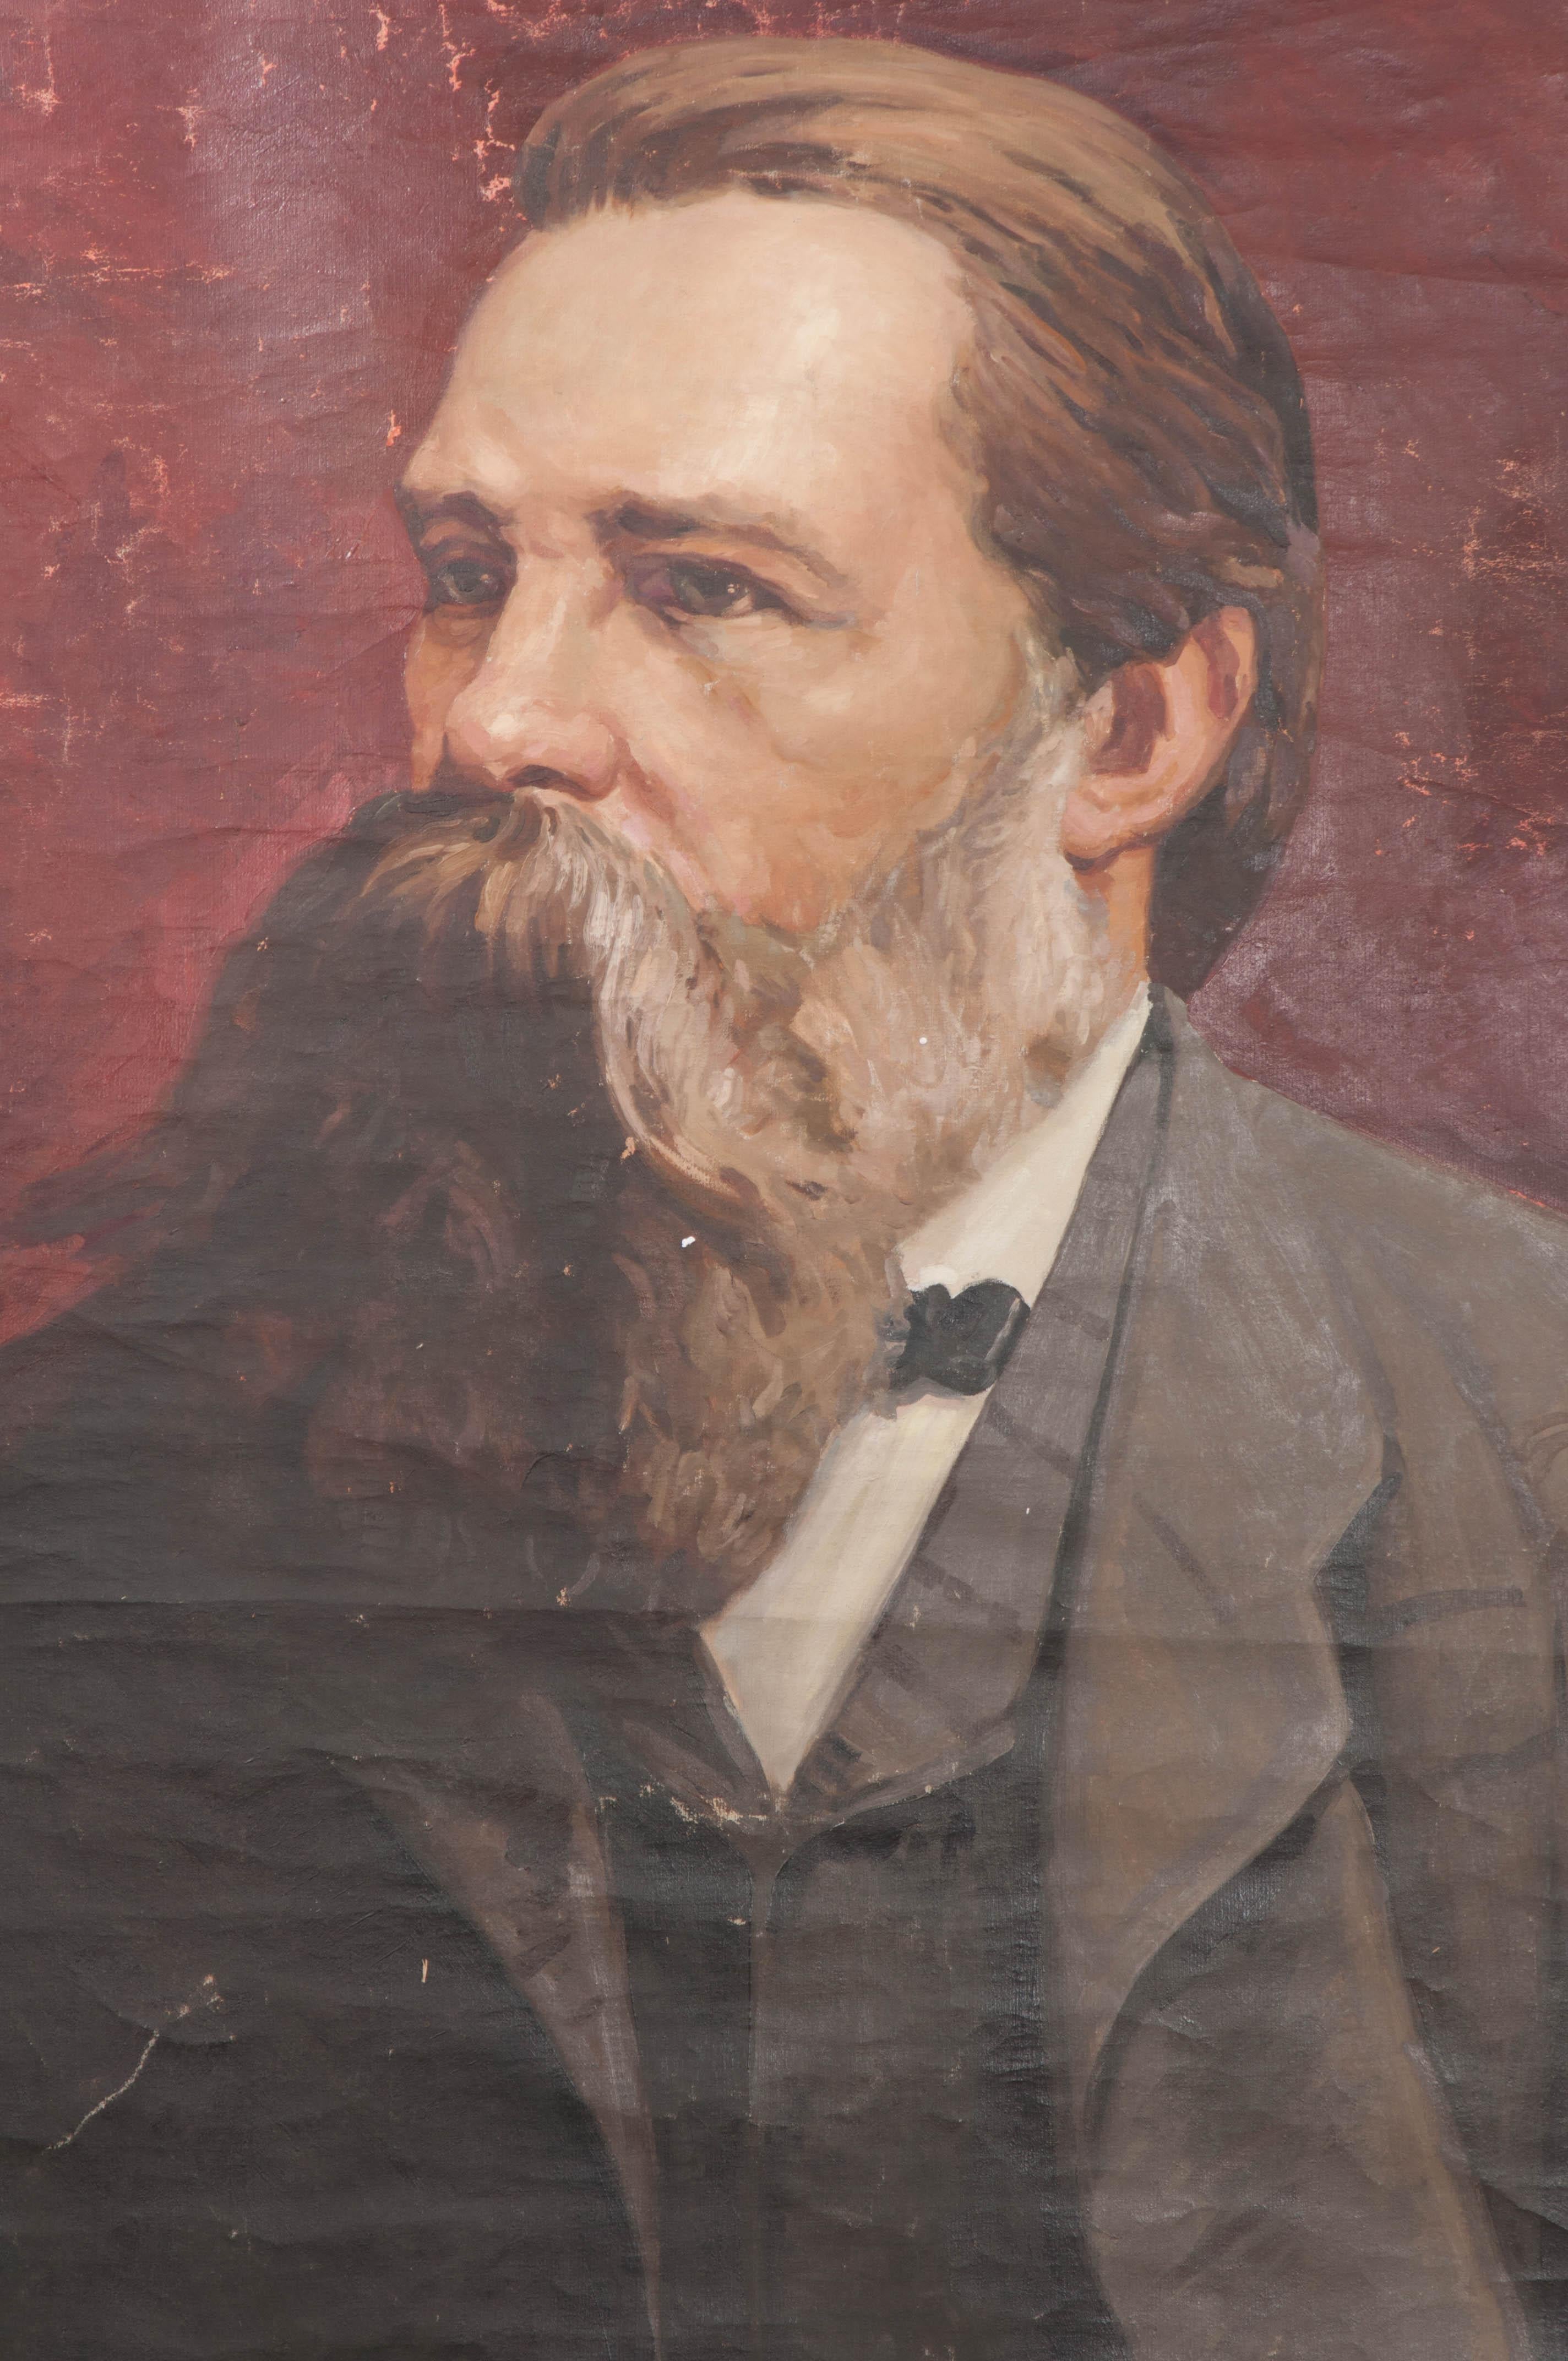 A heavily bearded Friedrich Engels stares into the distance in this massive 19th century German canvas portrait, 1820-1895. Engels was one of the leading political economists, philosophers, political theoreticians and revolutionary socialist of the